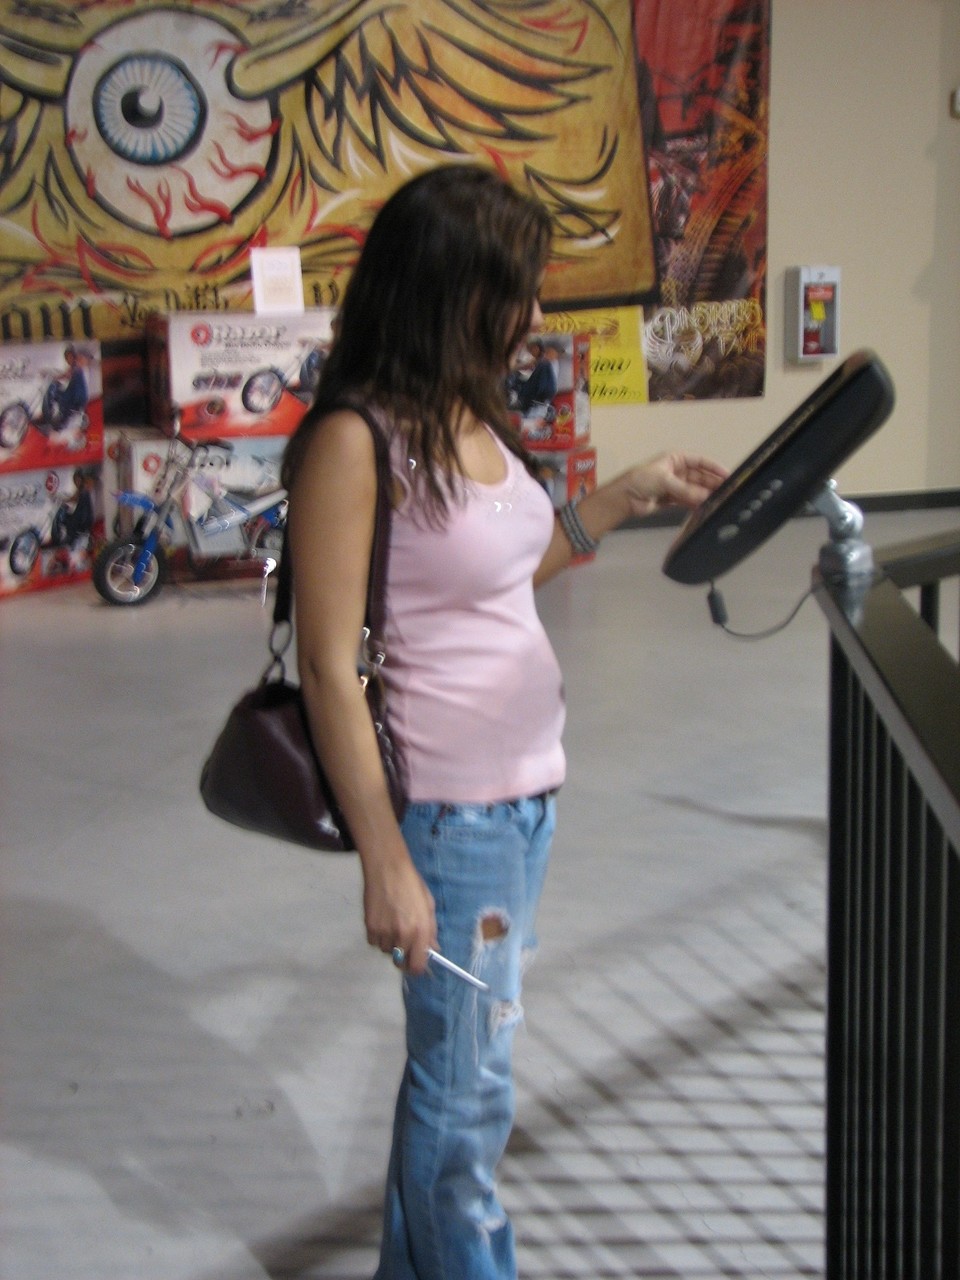 Amateur Katie in tight jeans flashes her big boobs with puffy nips in public ポルノ写真 #426861592 | Teen Girl Photos Pics, Amateur, モバイルポルノ